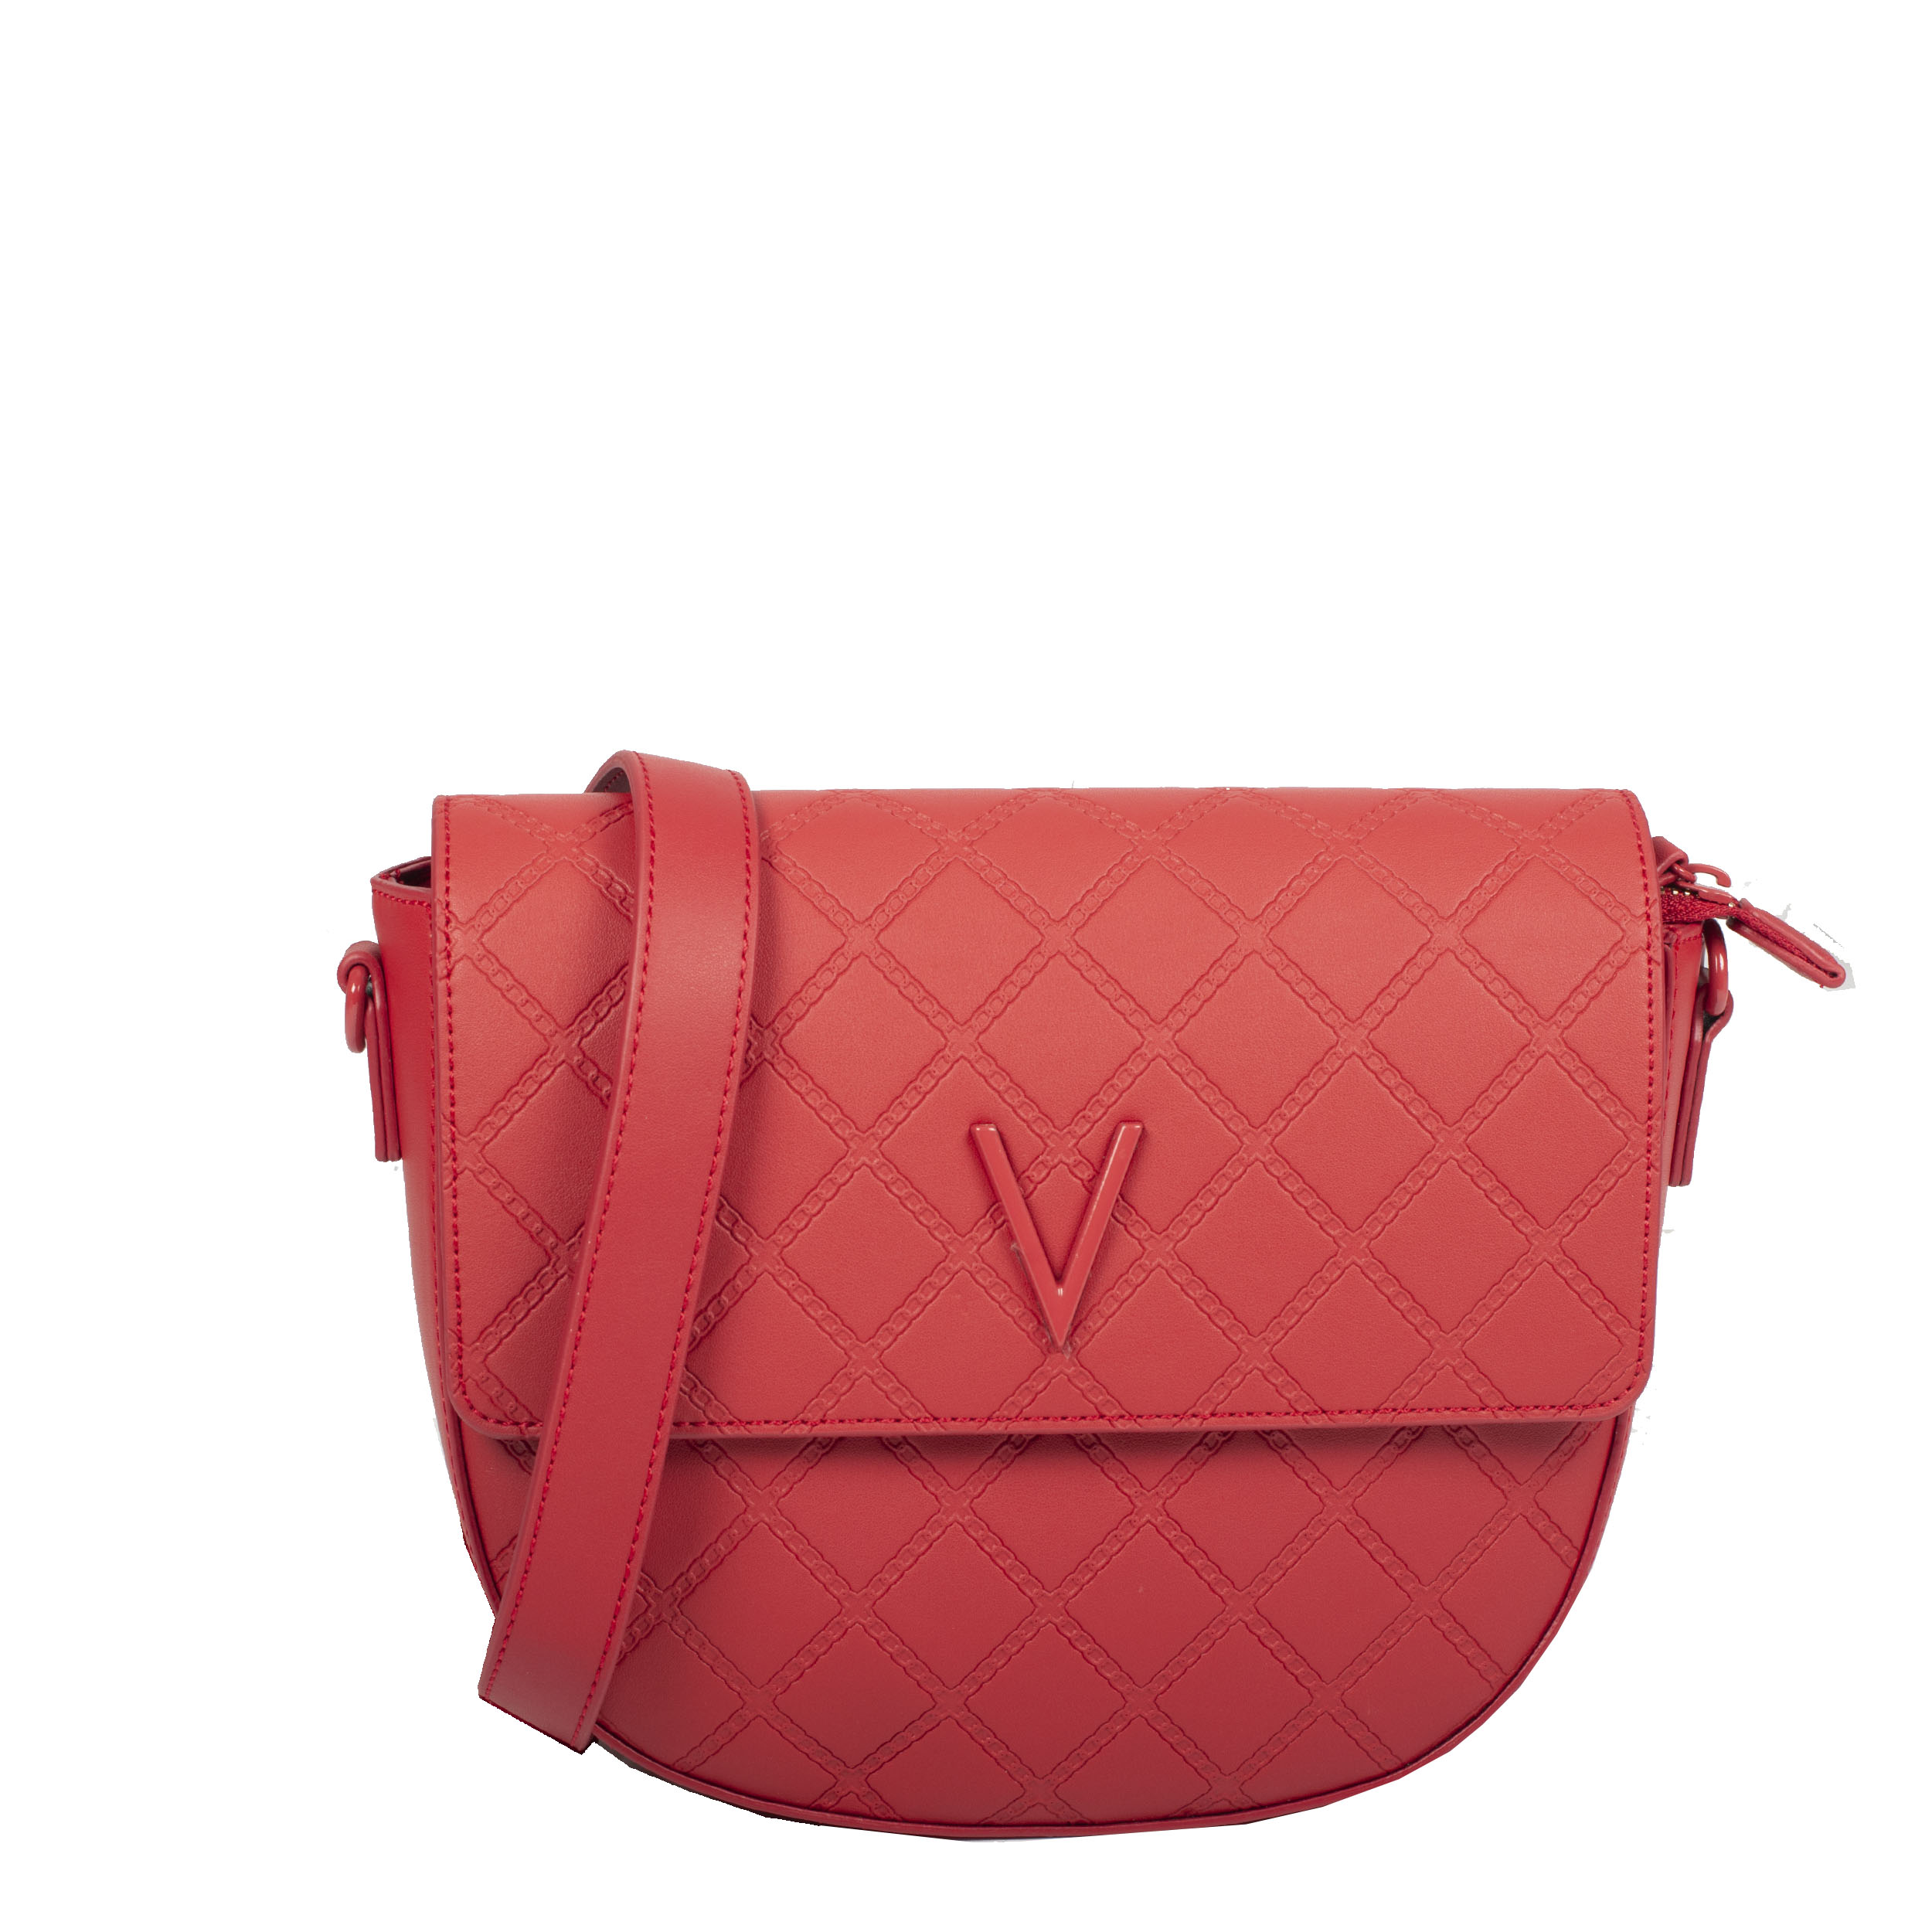 sac banduliere valentino-VBS6y802 rosso face et bandouliere